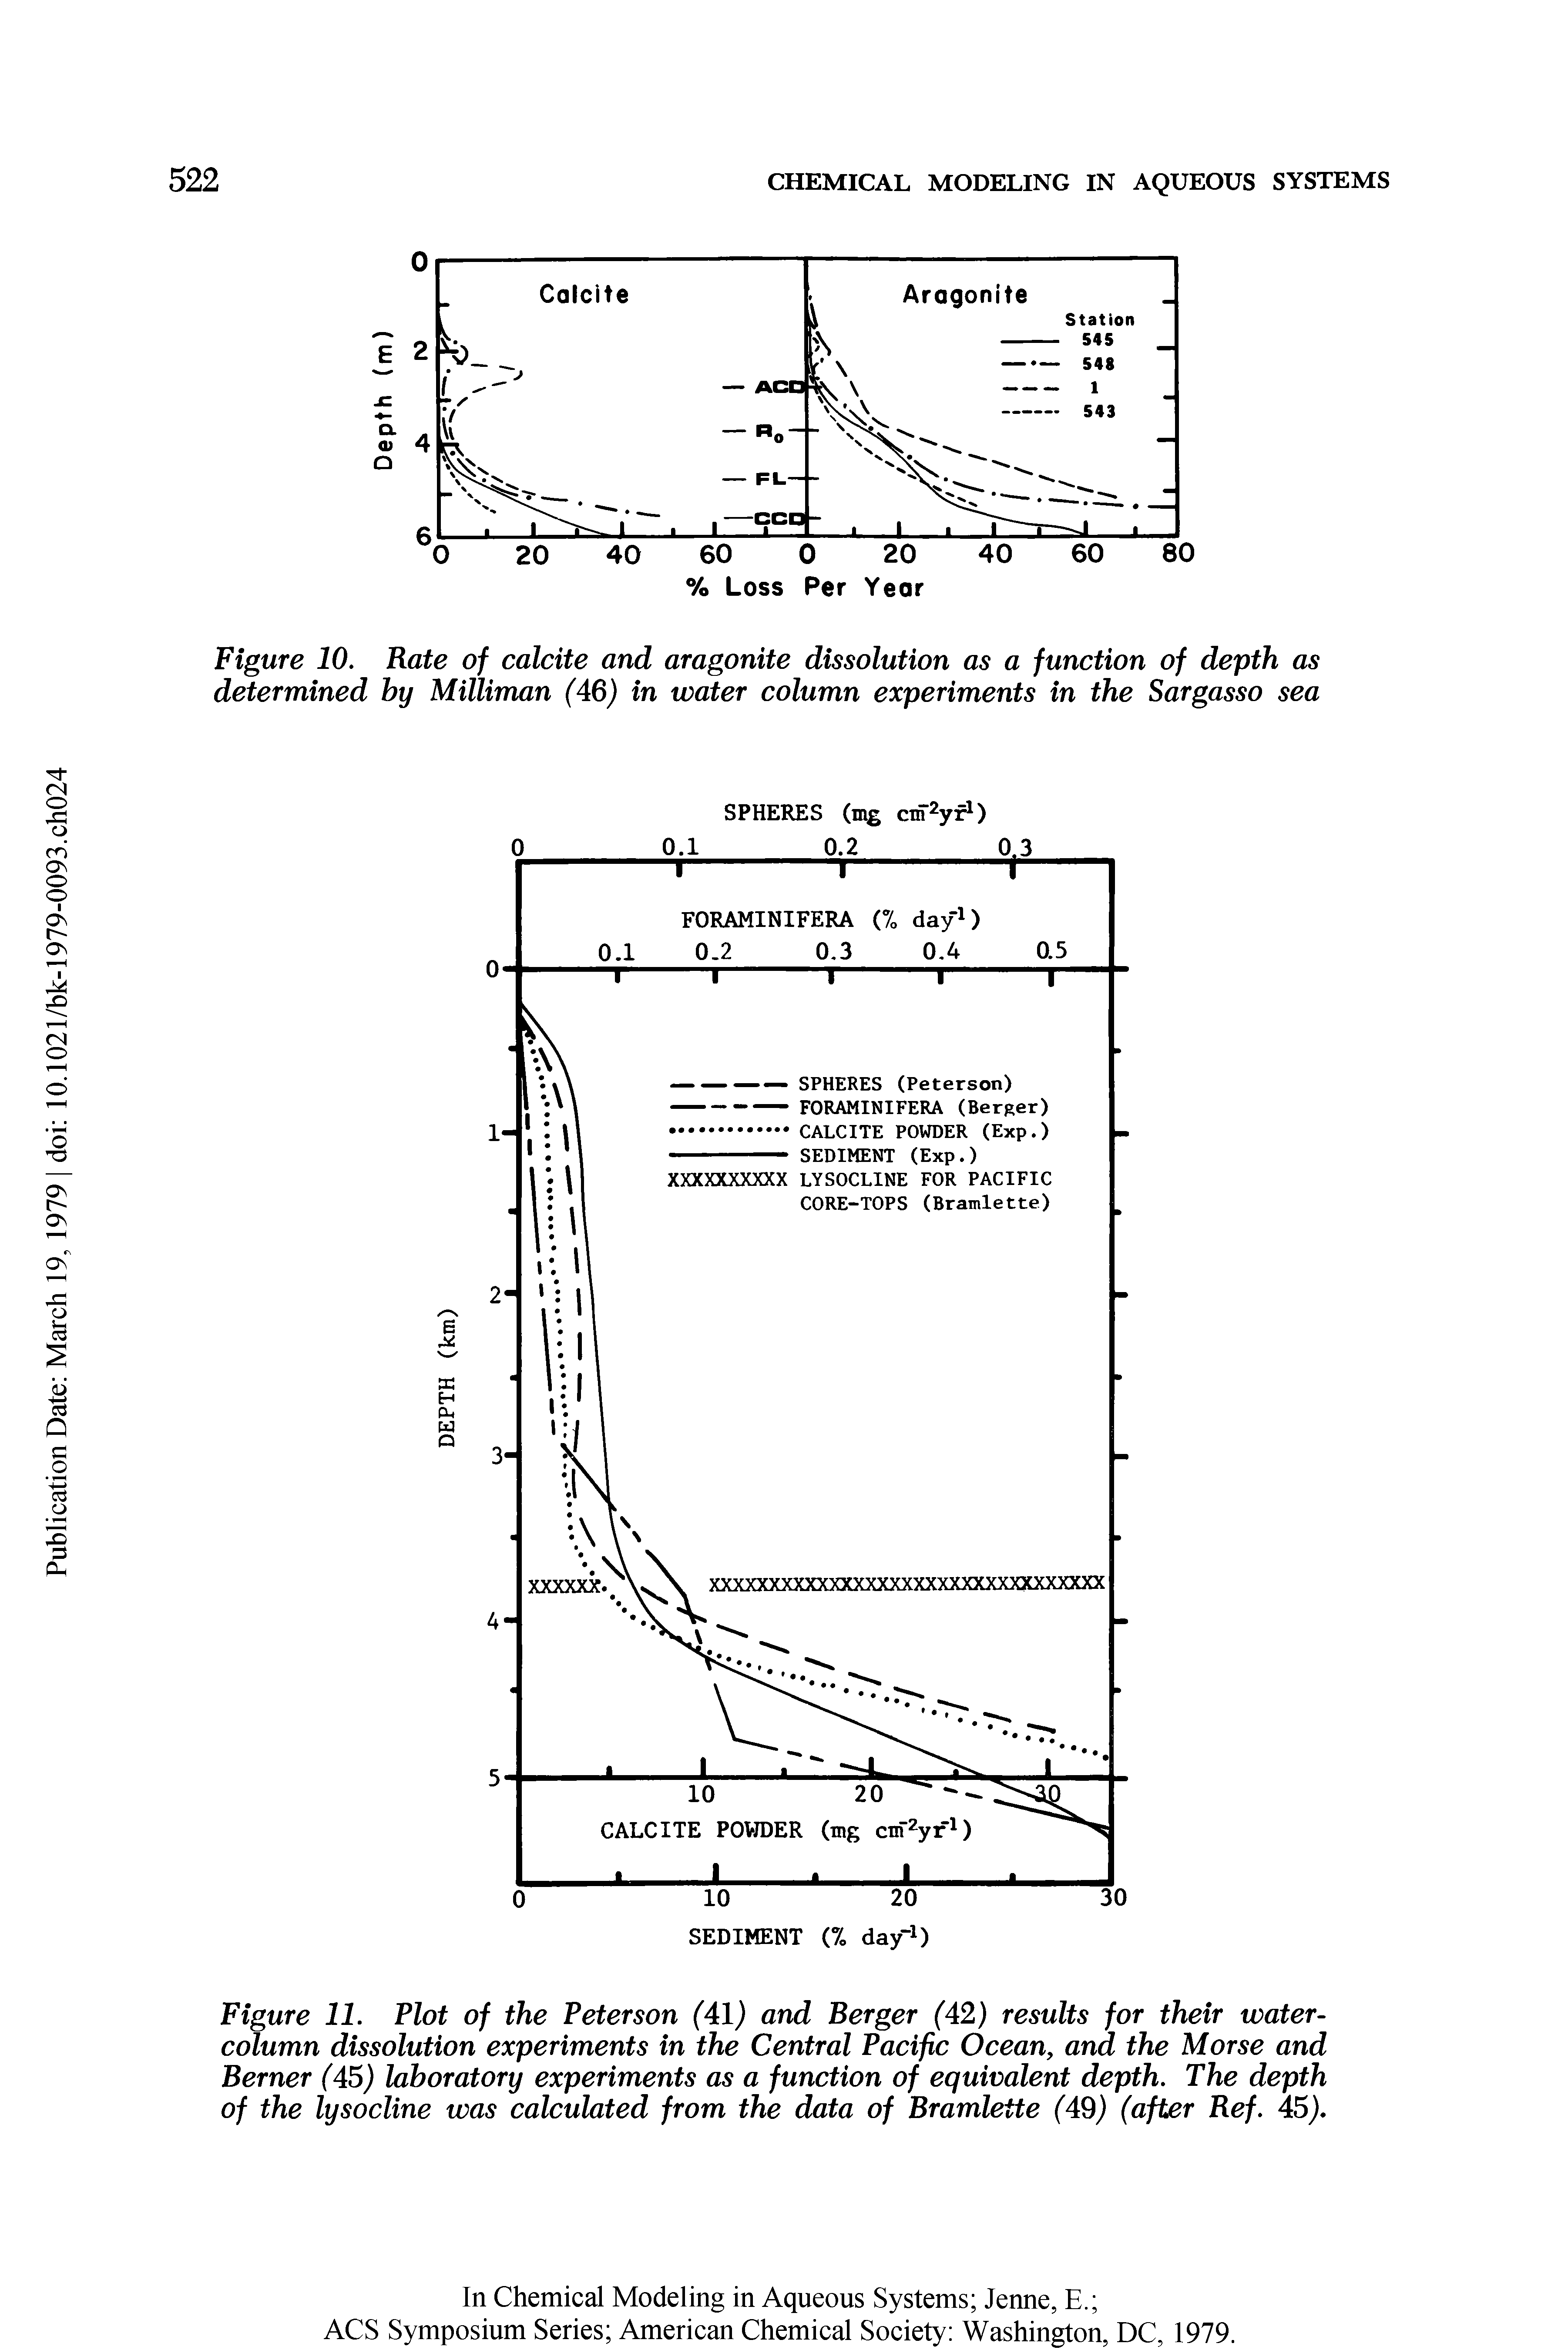 Figure 10. Rate of calcite and aragonite dissolution as a function of depth as determined by Milliman (AO) in water column experiments in the Sargasso sea...